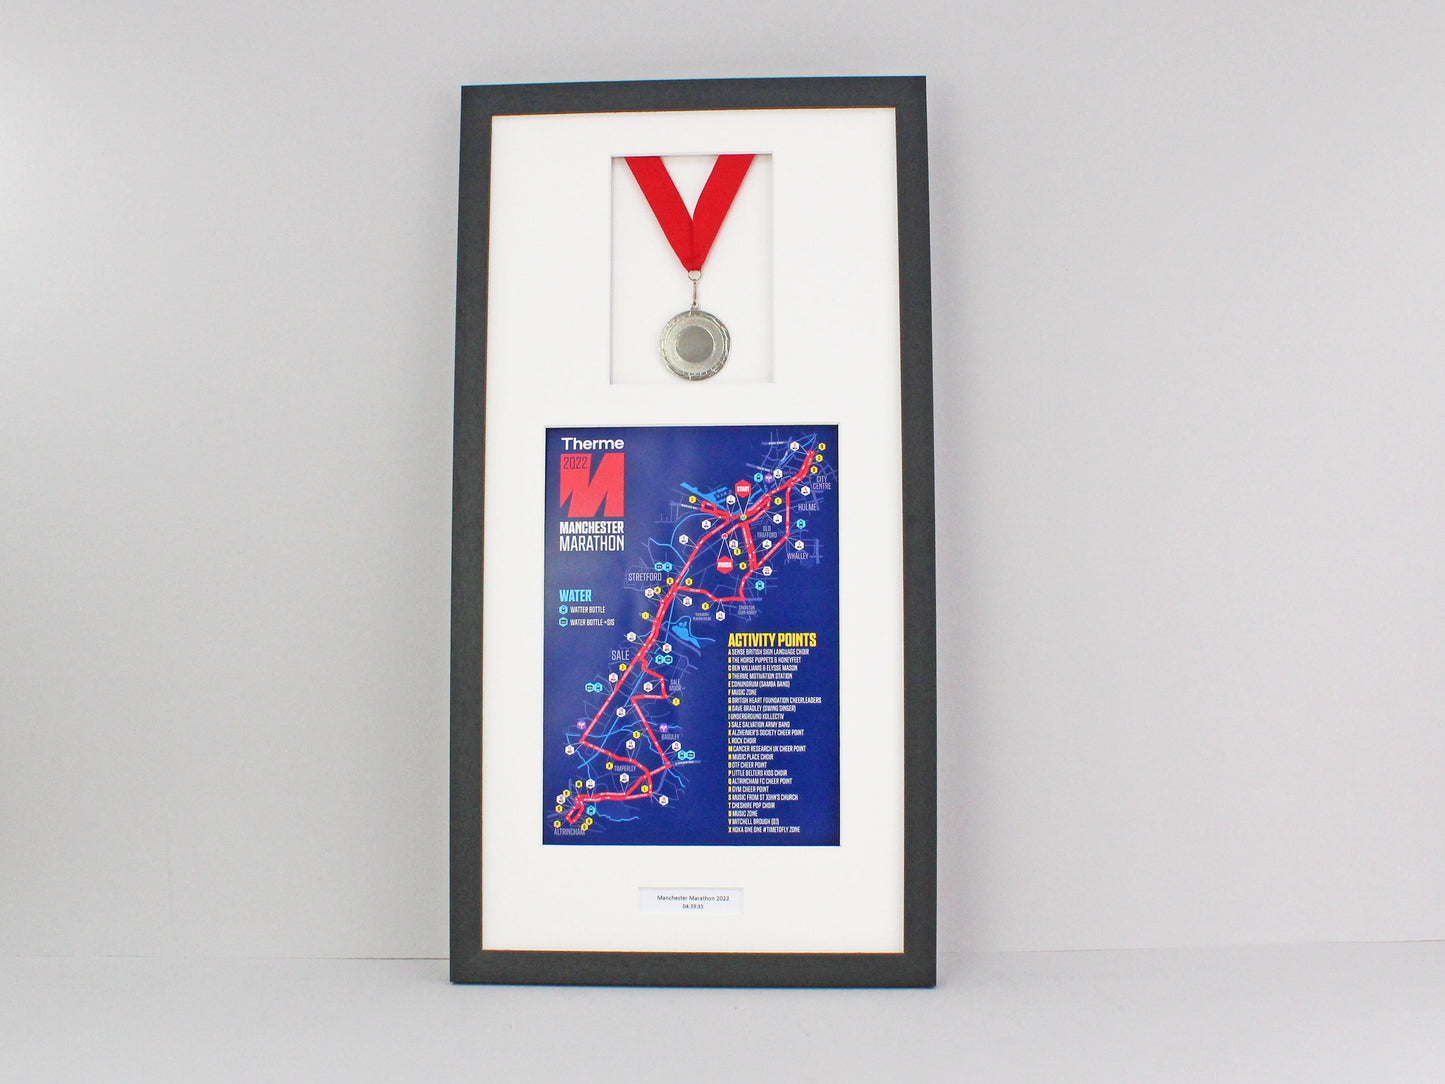 Personalised Medal Display frame for One Medal and A4 Certificate / Course Map.